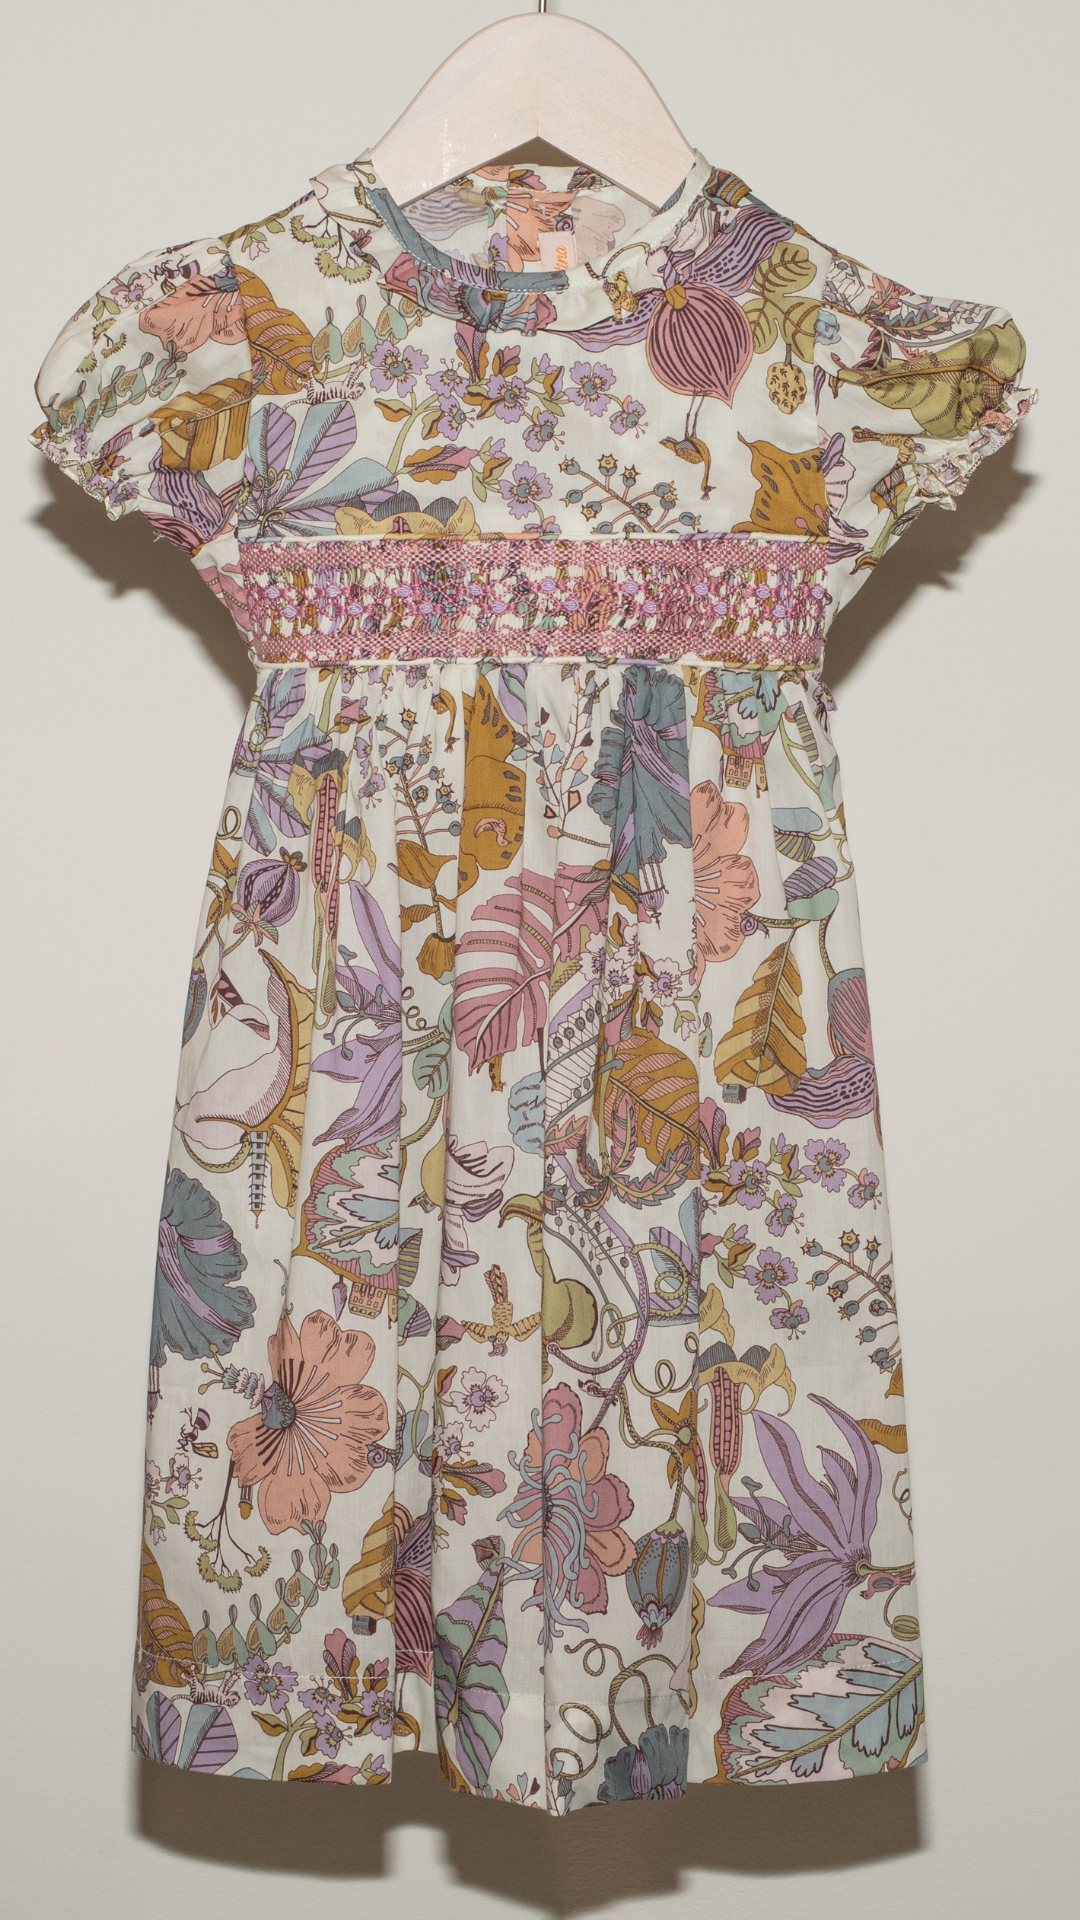 HAND EMBROIDERED DRESS IN VIOLET LIBERTY FLOWERS